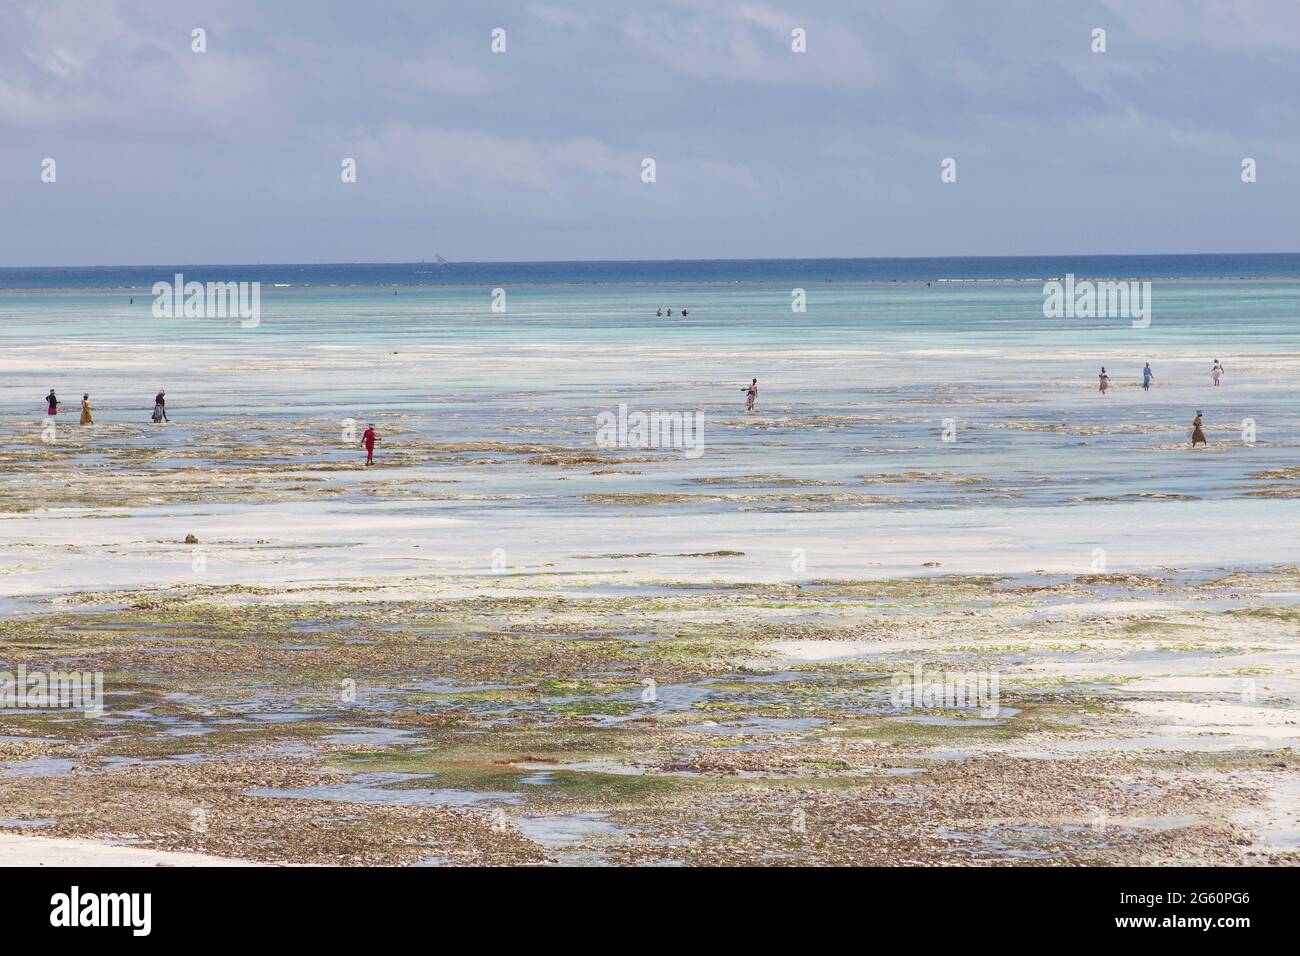 People walk out into the reef during low tide. Stock Photo